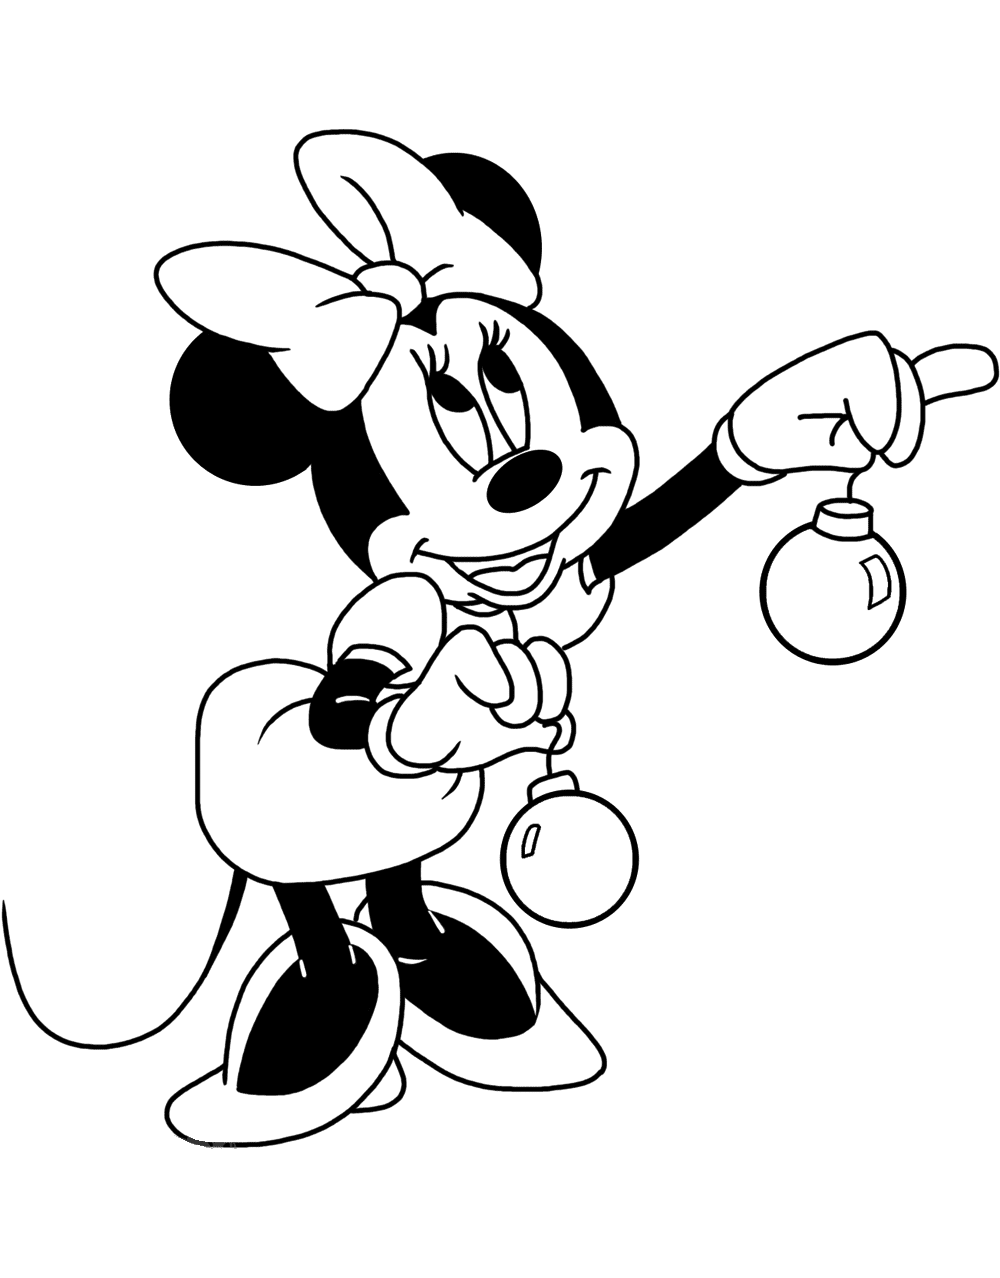 minnie mouse color page minnie mouse coloring pages disney coloring book page minnie color mouse 